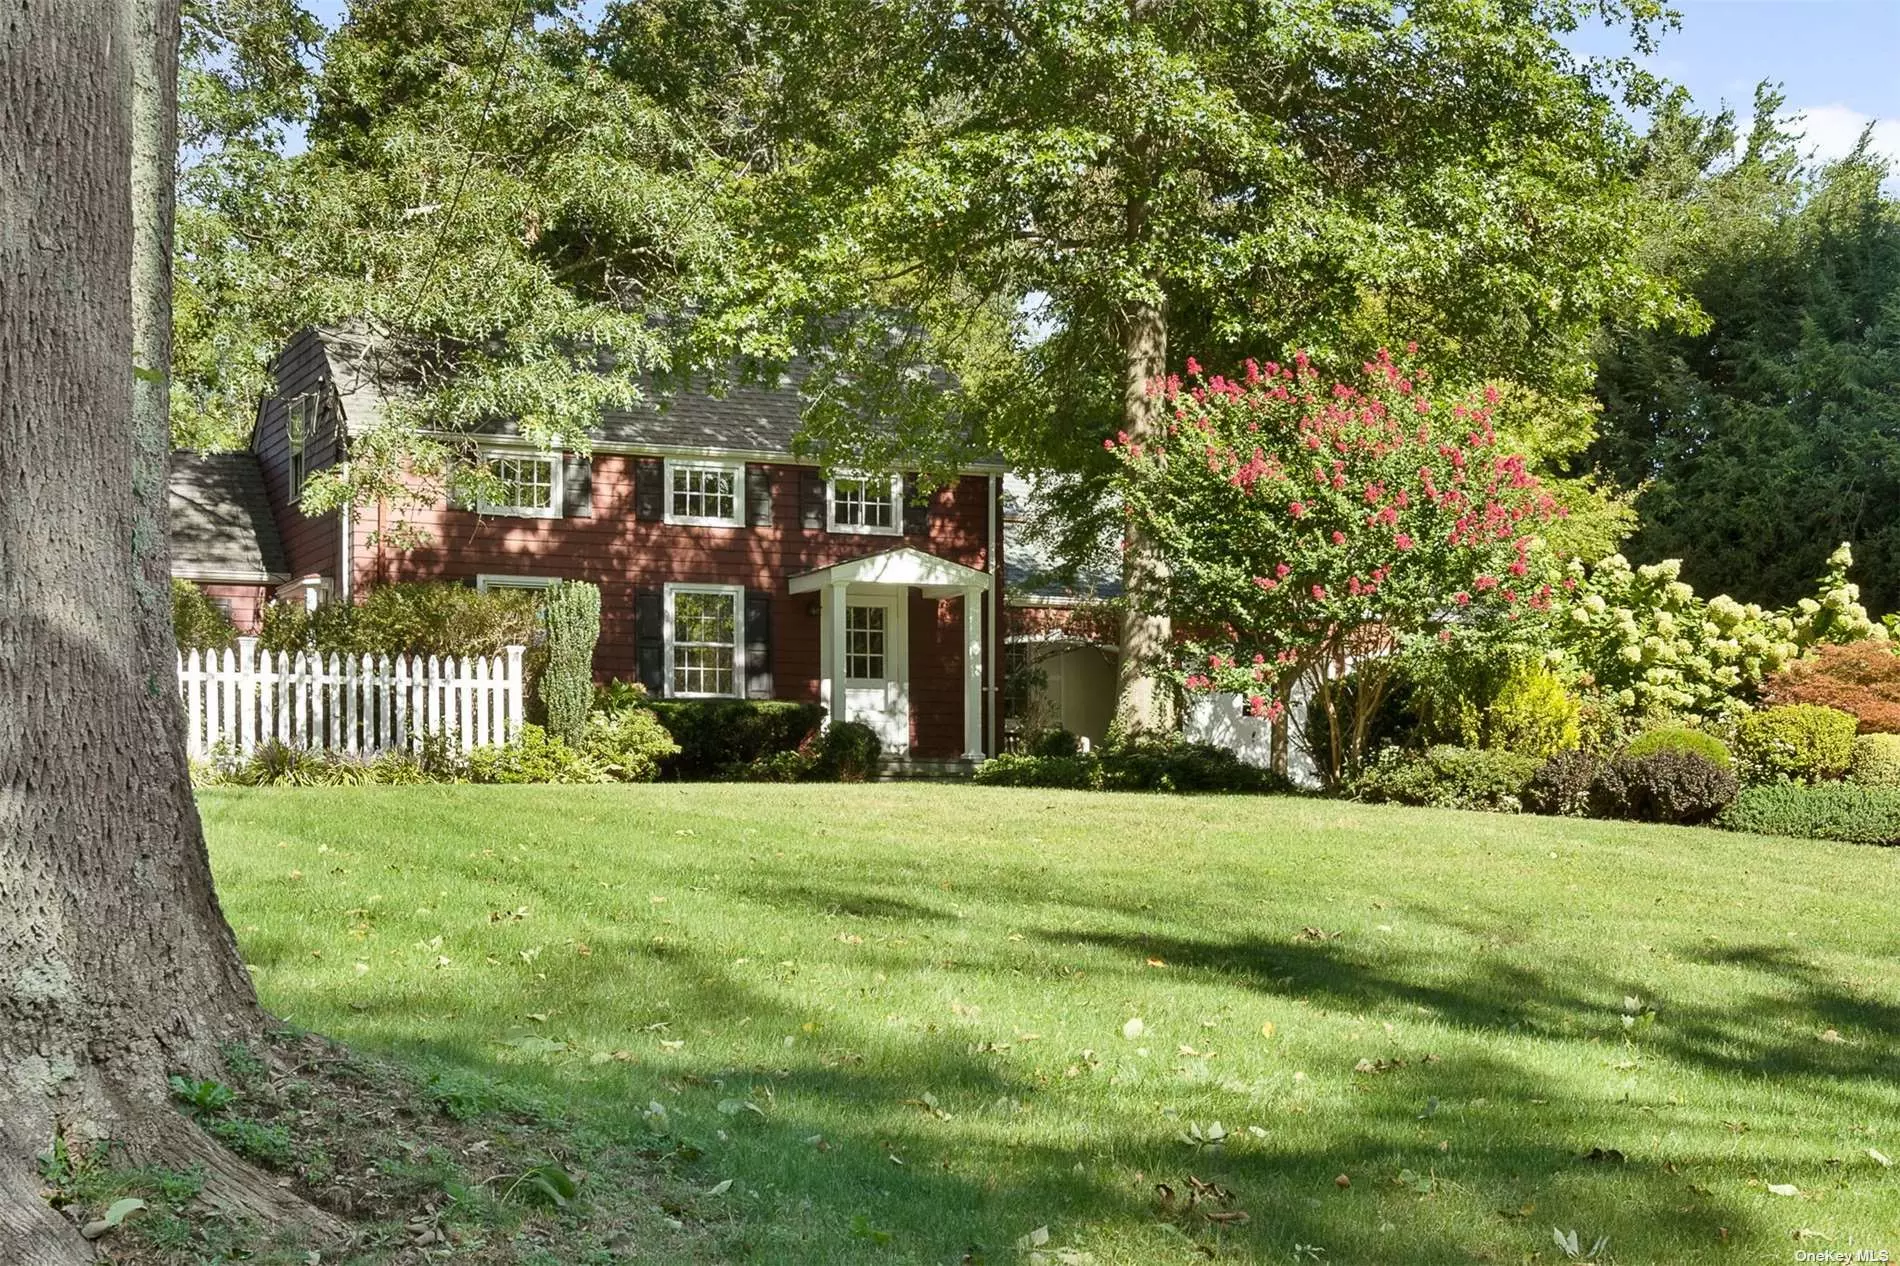 Welcome to this Charming Cape Beautifully Situated on .75 Acres in the Heart of Huntington, Bordering Lloyd Harbor. Traditional Detail, Old World Millwork, and Wide Plank Oak Floors Color this Wonderful Find. Perfect for the Buyer who Seeks Warmth and Architectural Character.  The Three Season Porch Opens to the Thoughtfully Landscaped Grounds with Specimen Plantings and Mature Trees for Ultimate Privacy! Minutes to Lovely Local Beaches and Boating Activities. Huntington SD #3.